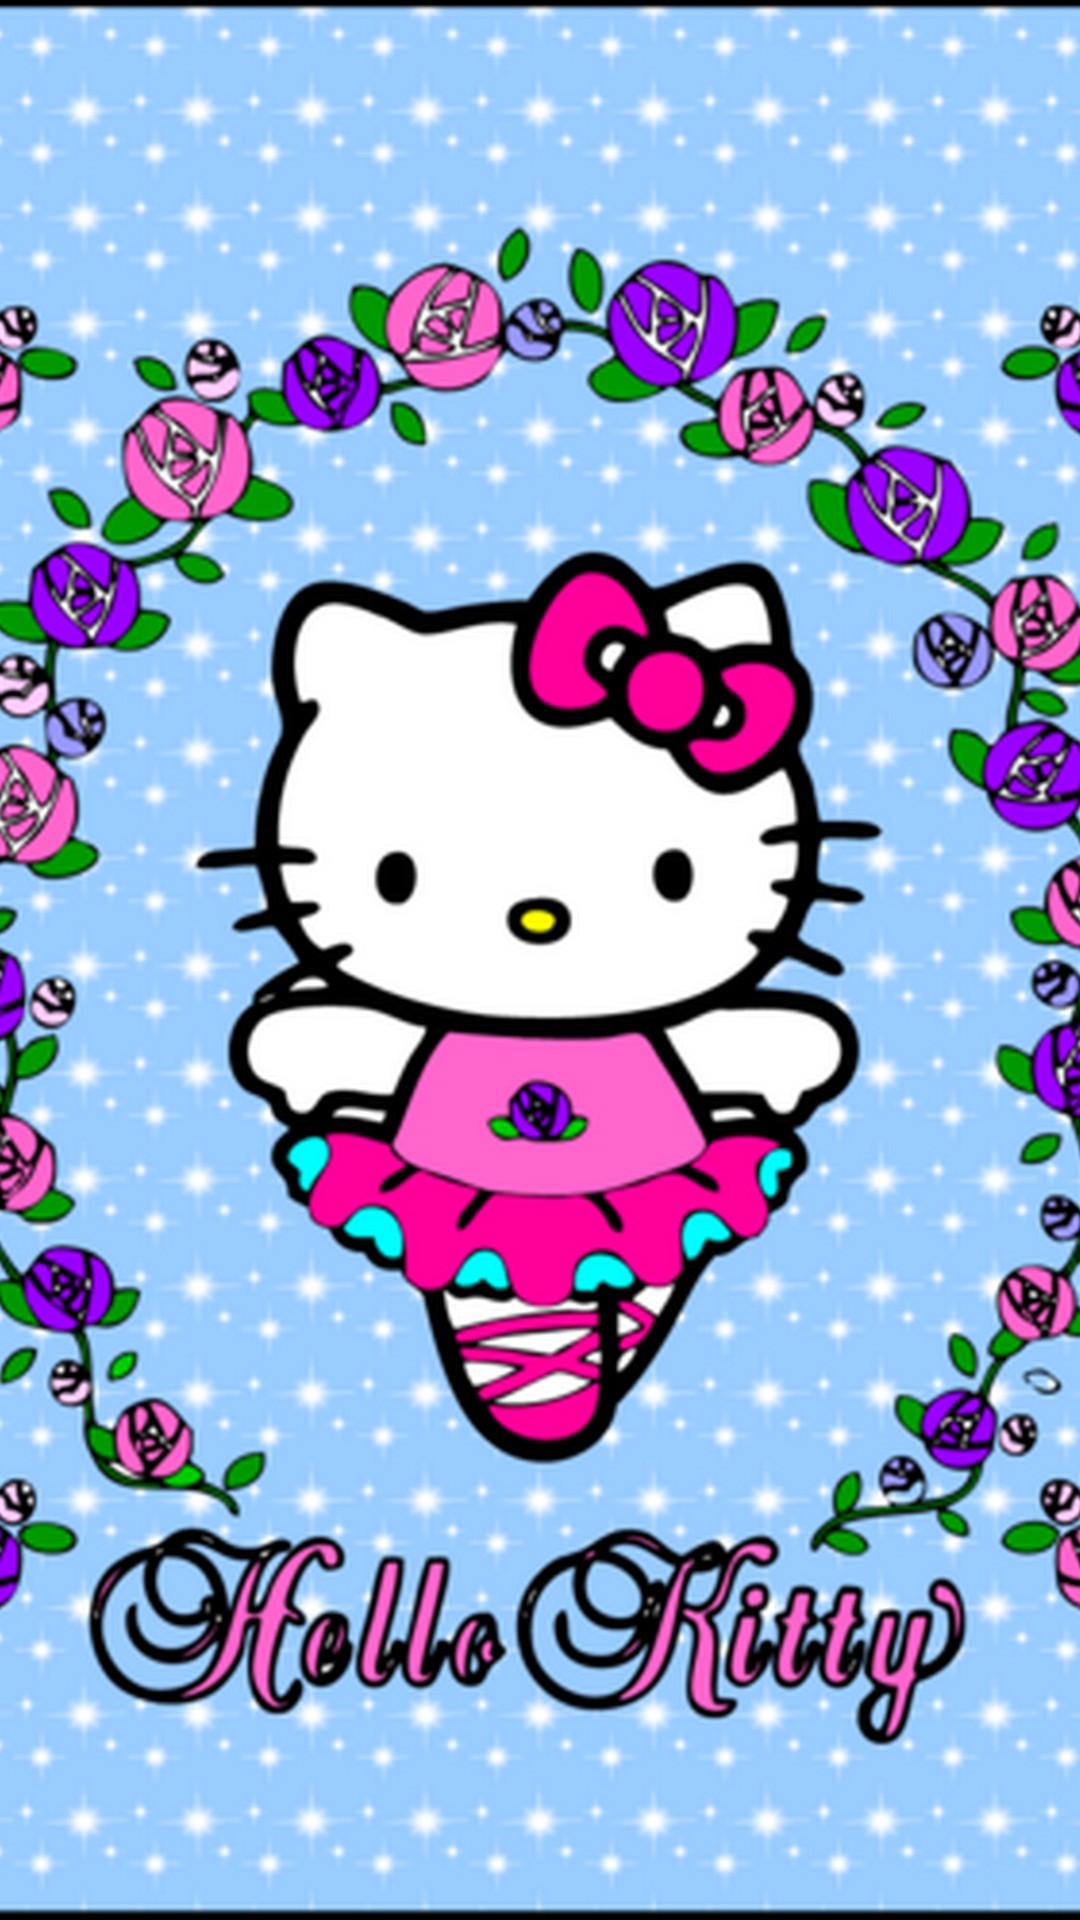 Wallpaper Sanrio Hello Kitty Android with image resolution 1080x1920 pixel. You can make this wallpaper for your Android backgrounds, Tablet, Smartphones Screensavers and Mobile Phone Lock Screen